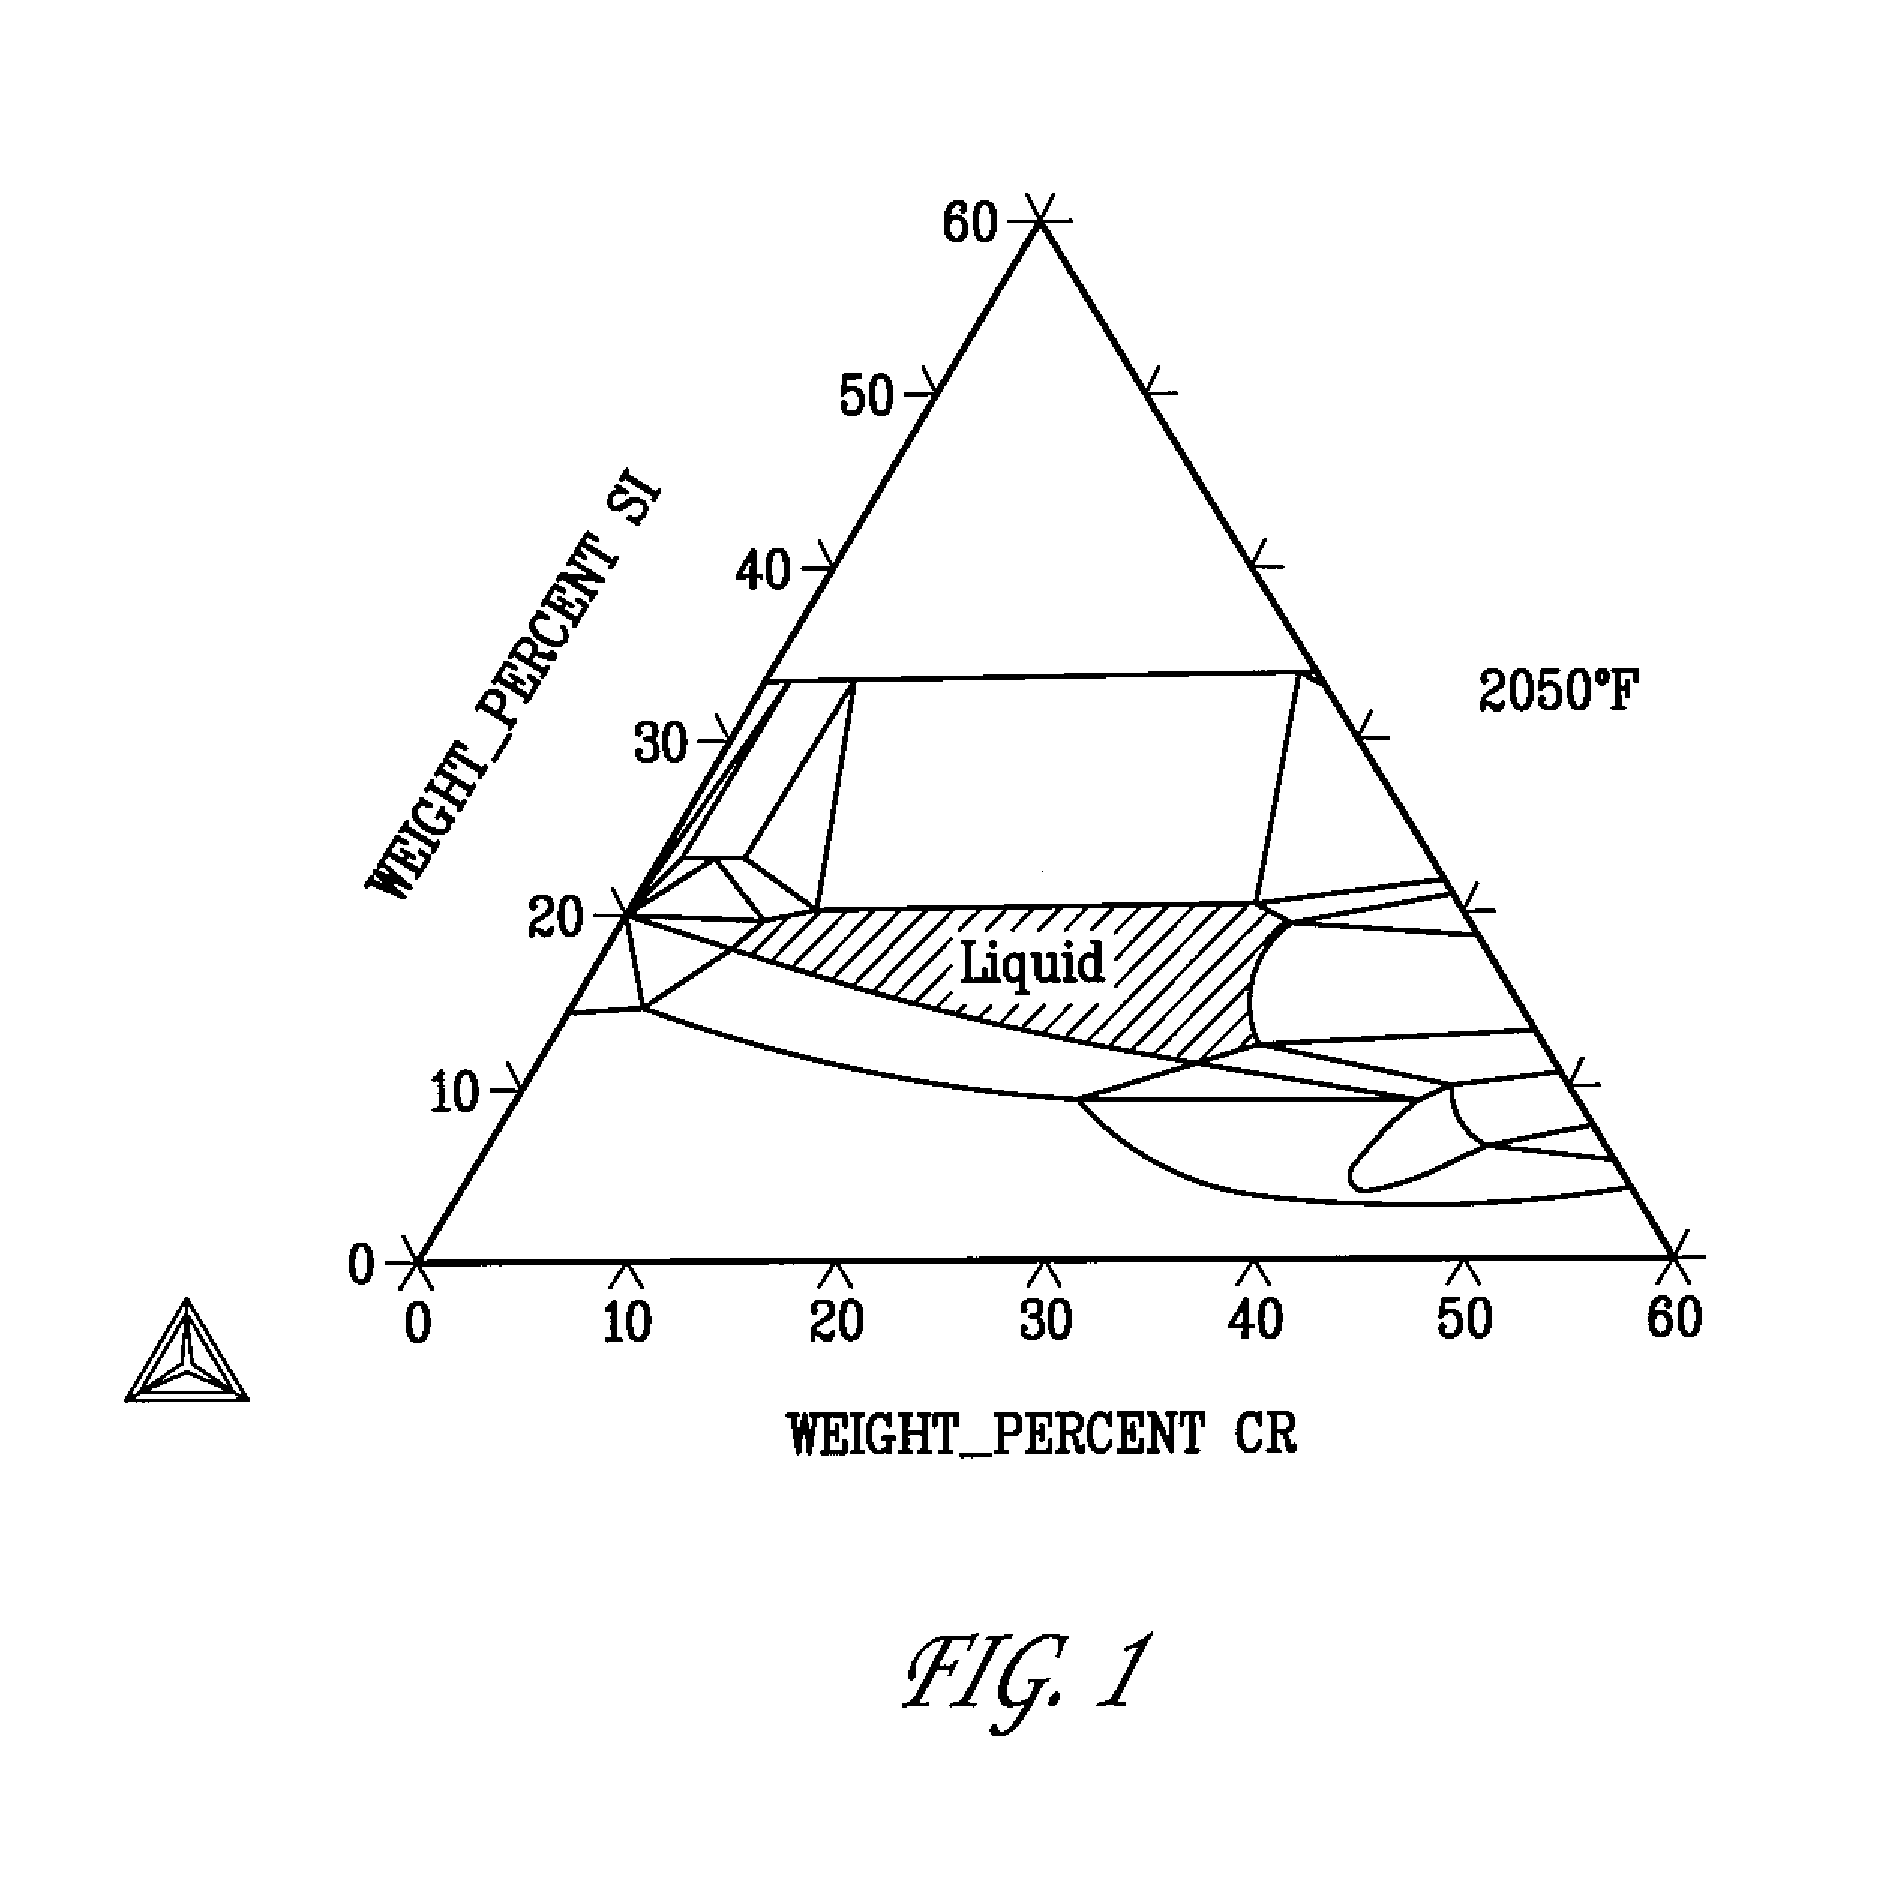 Powder metallurgical compositions and methods for making the same